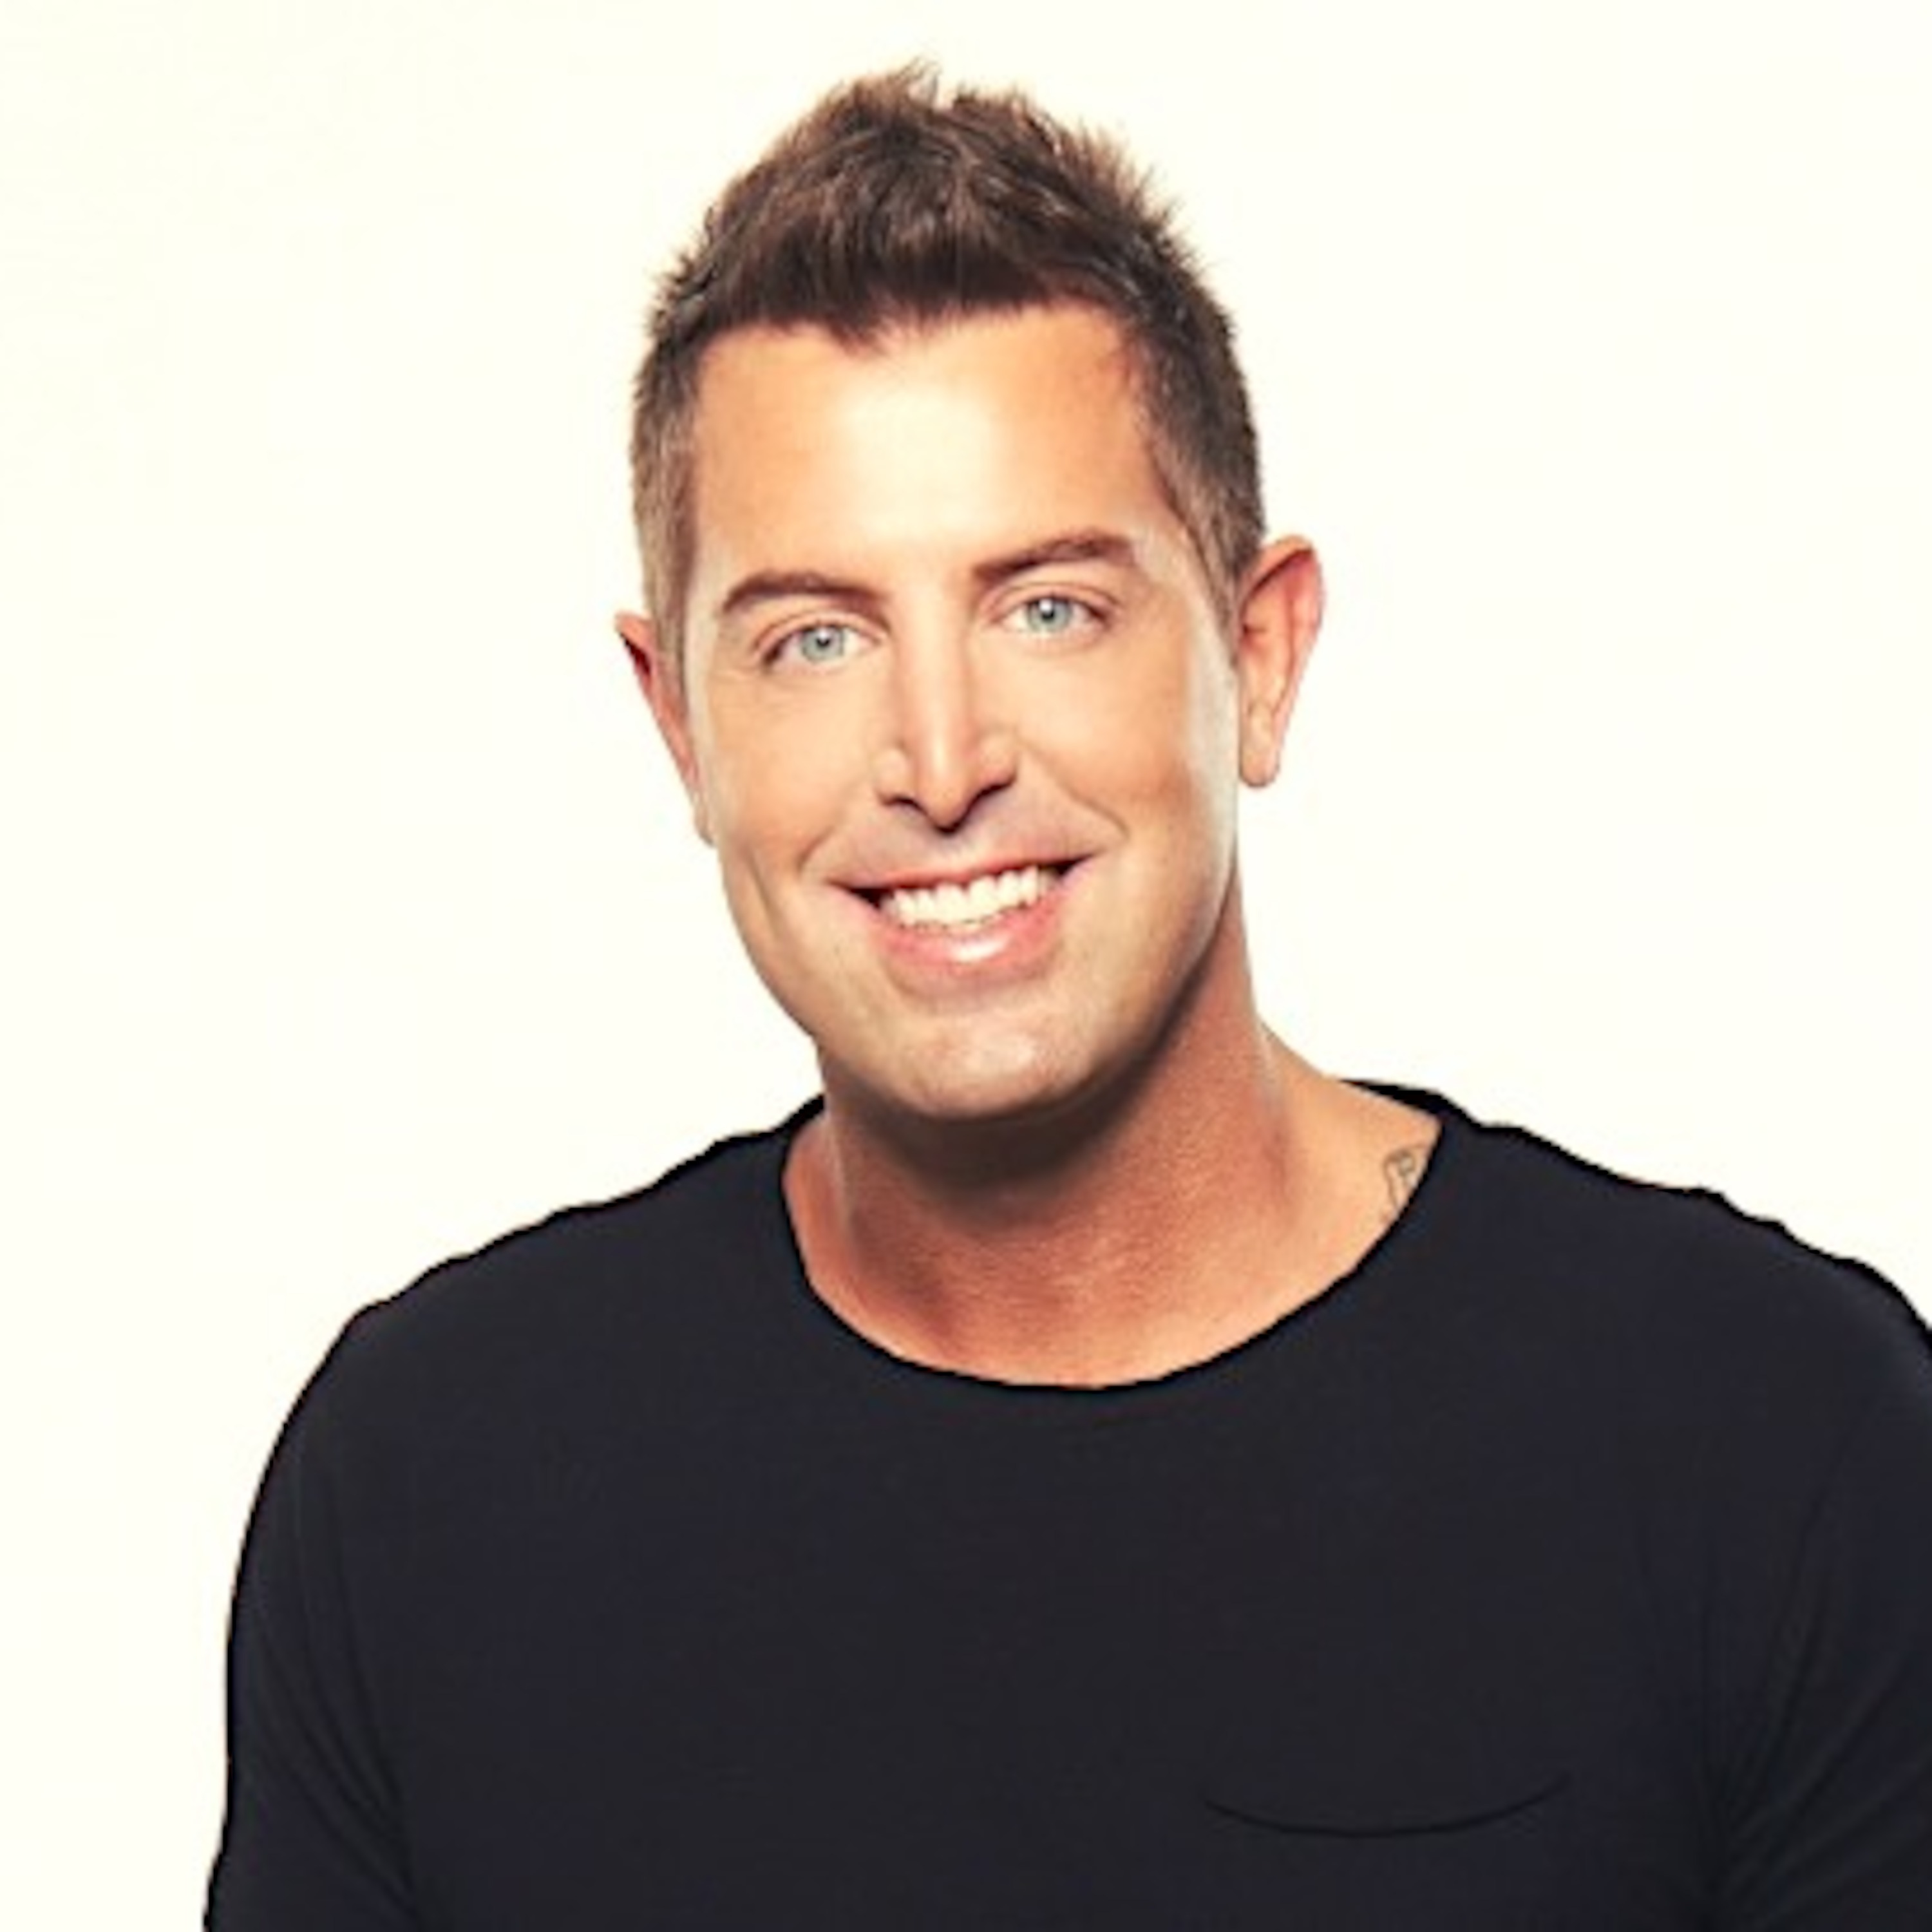 Day Of Hope Interview With Jeremy Camp! Your Network Of Praise's podcast